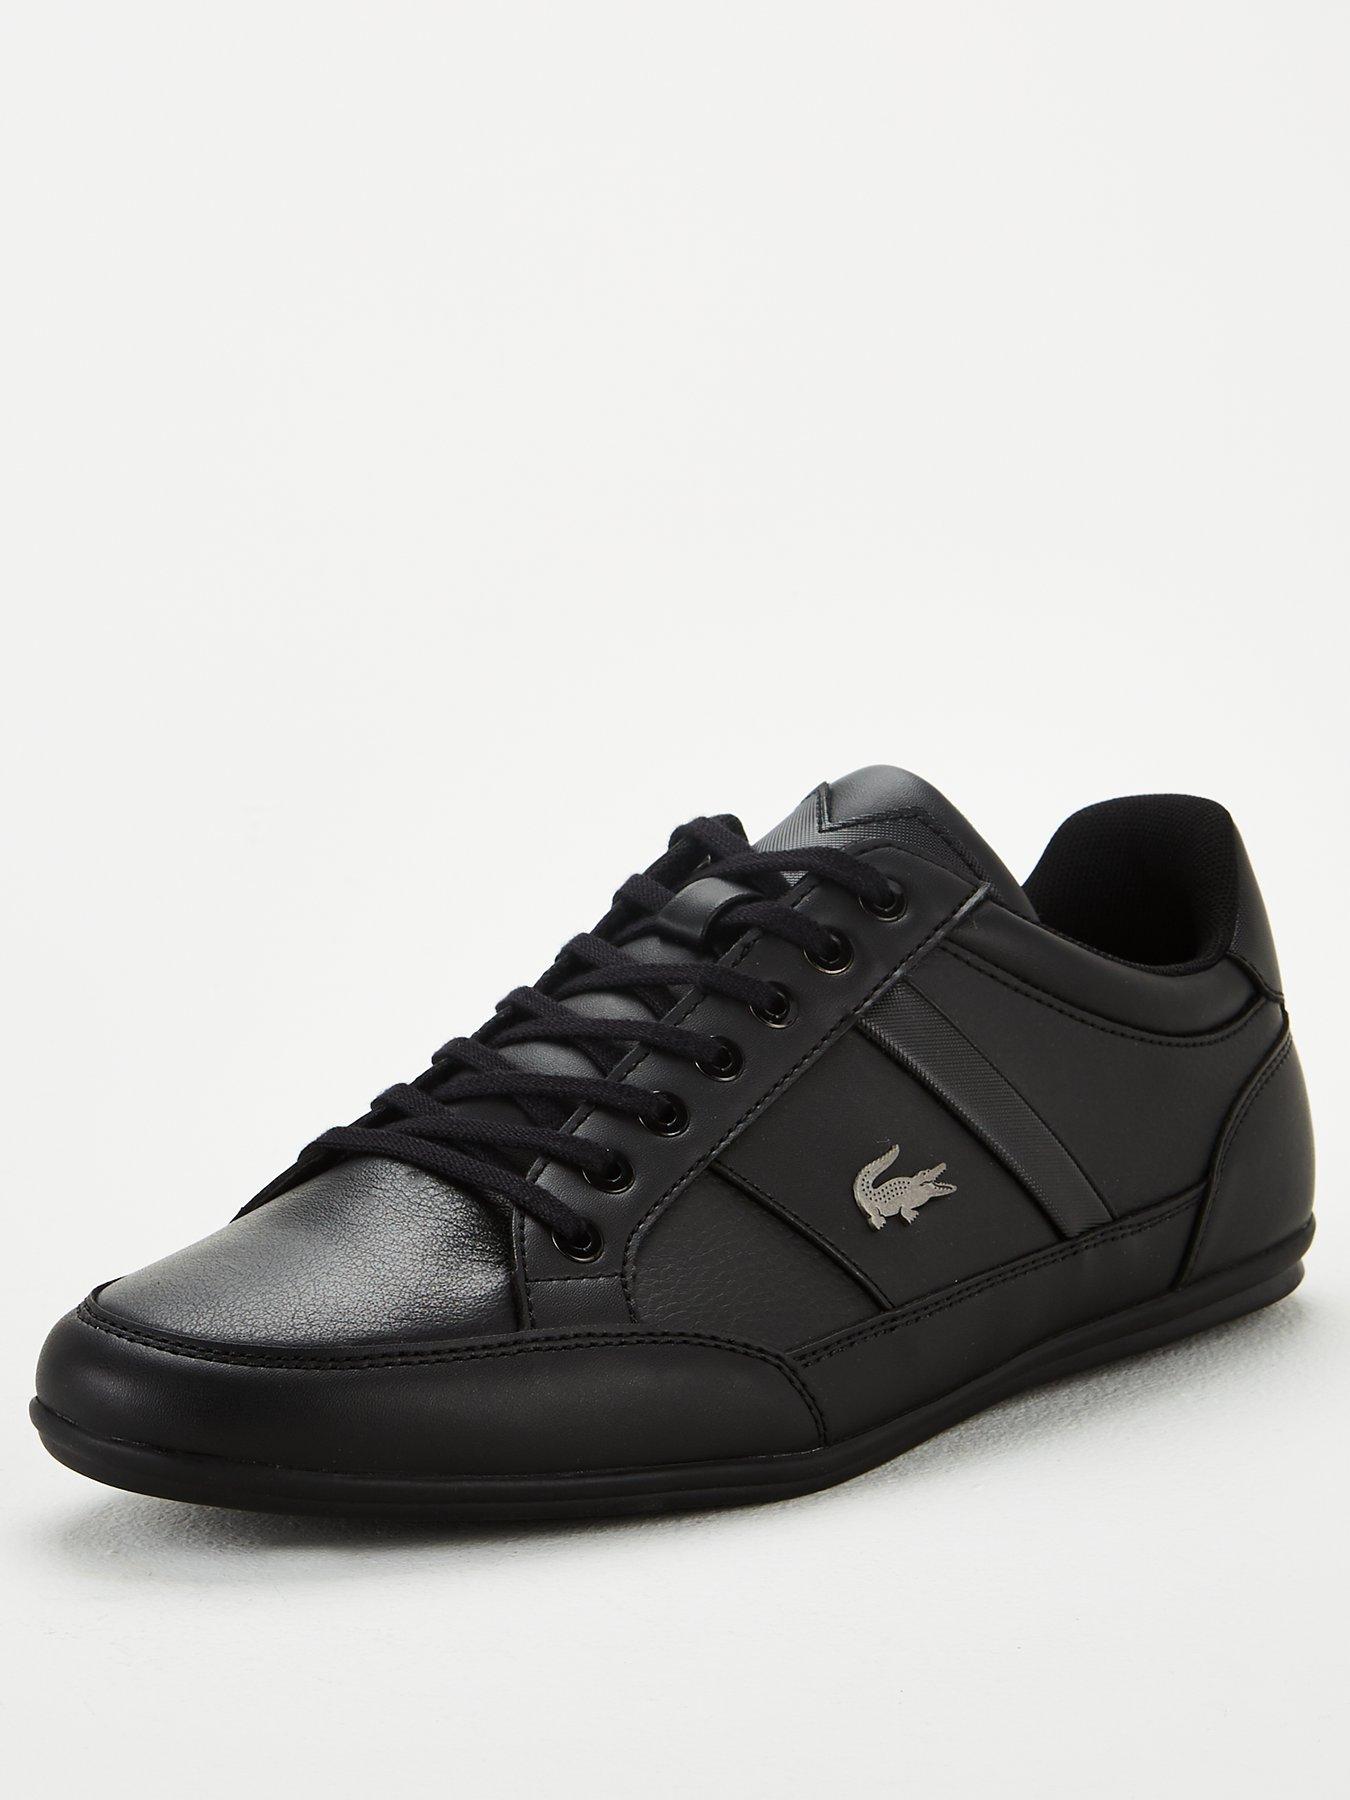 Lacoste Chaymon Leather Trainers 